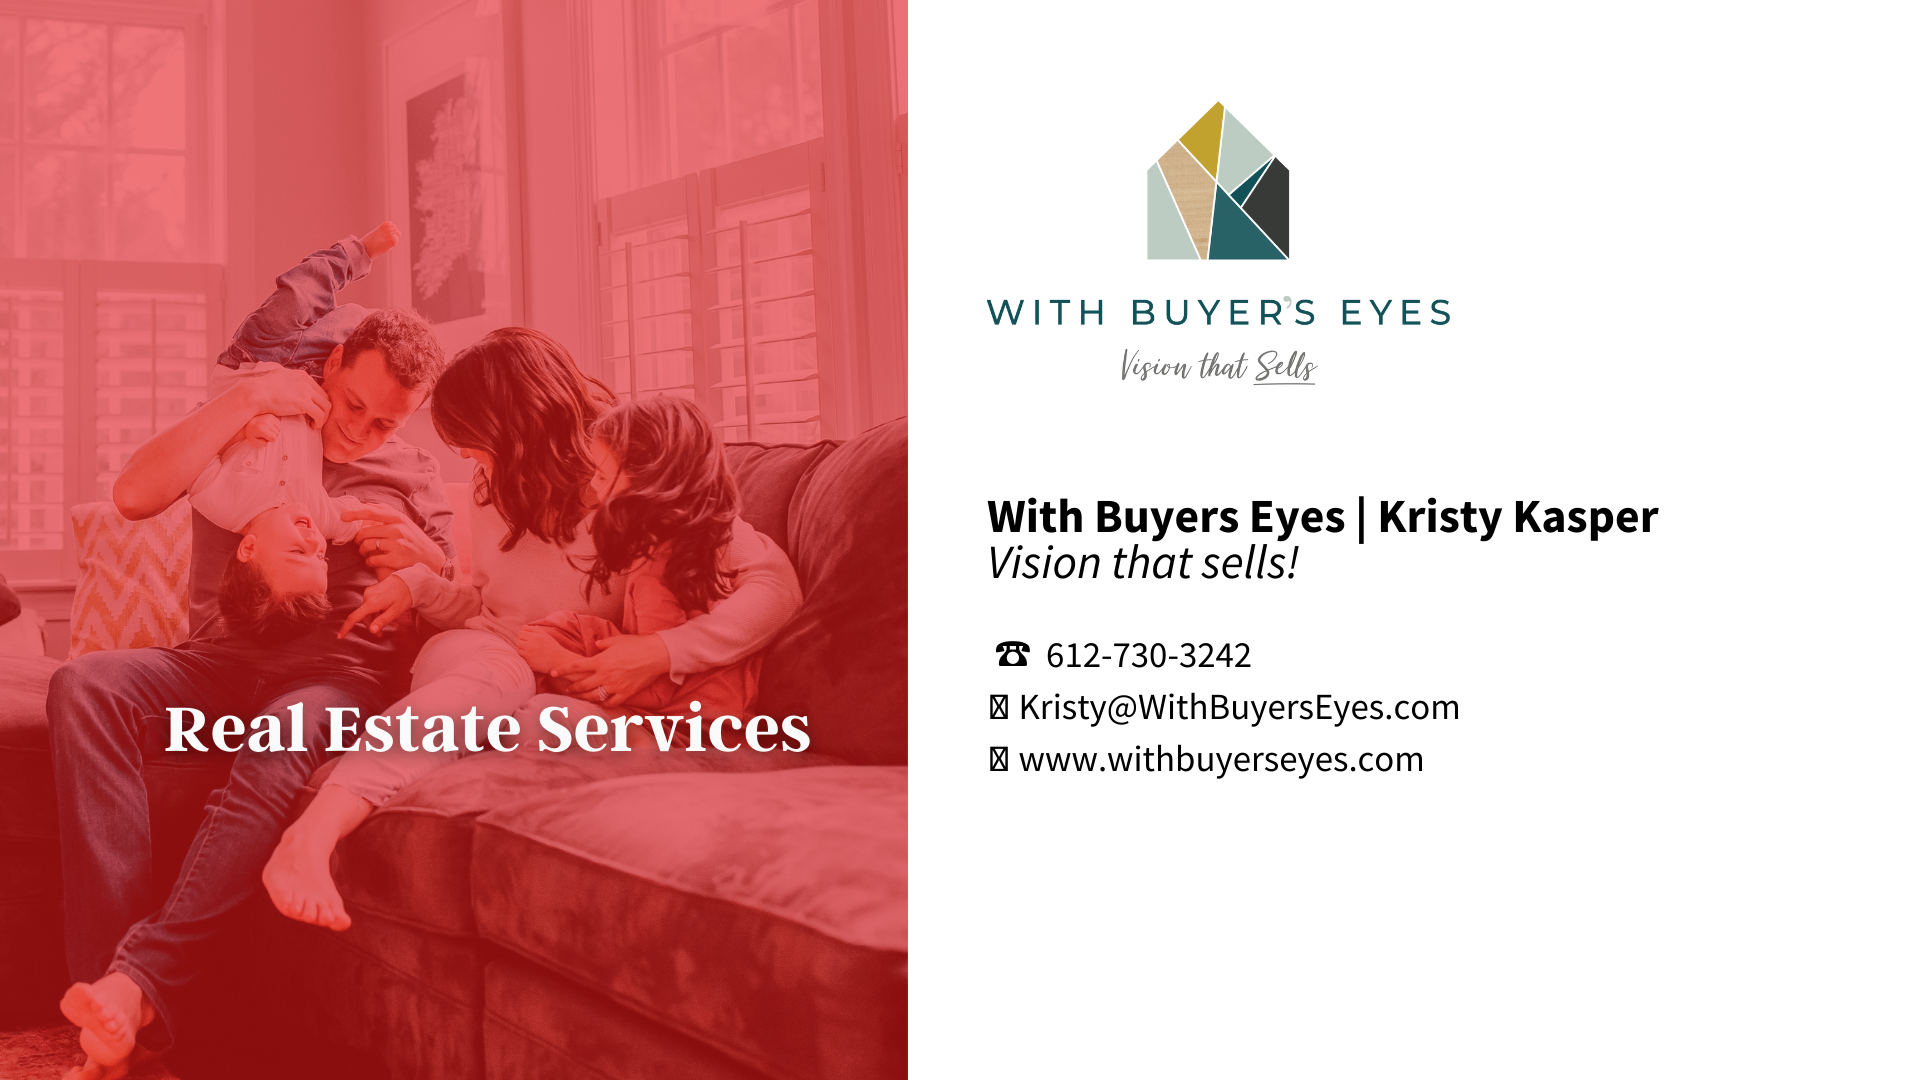 Kristy Kasper - With Buyer's Eyes - Contact Information